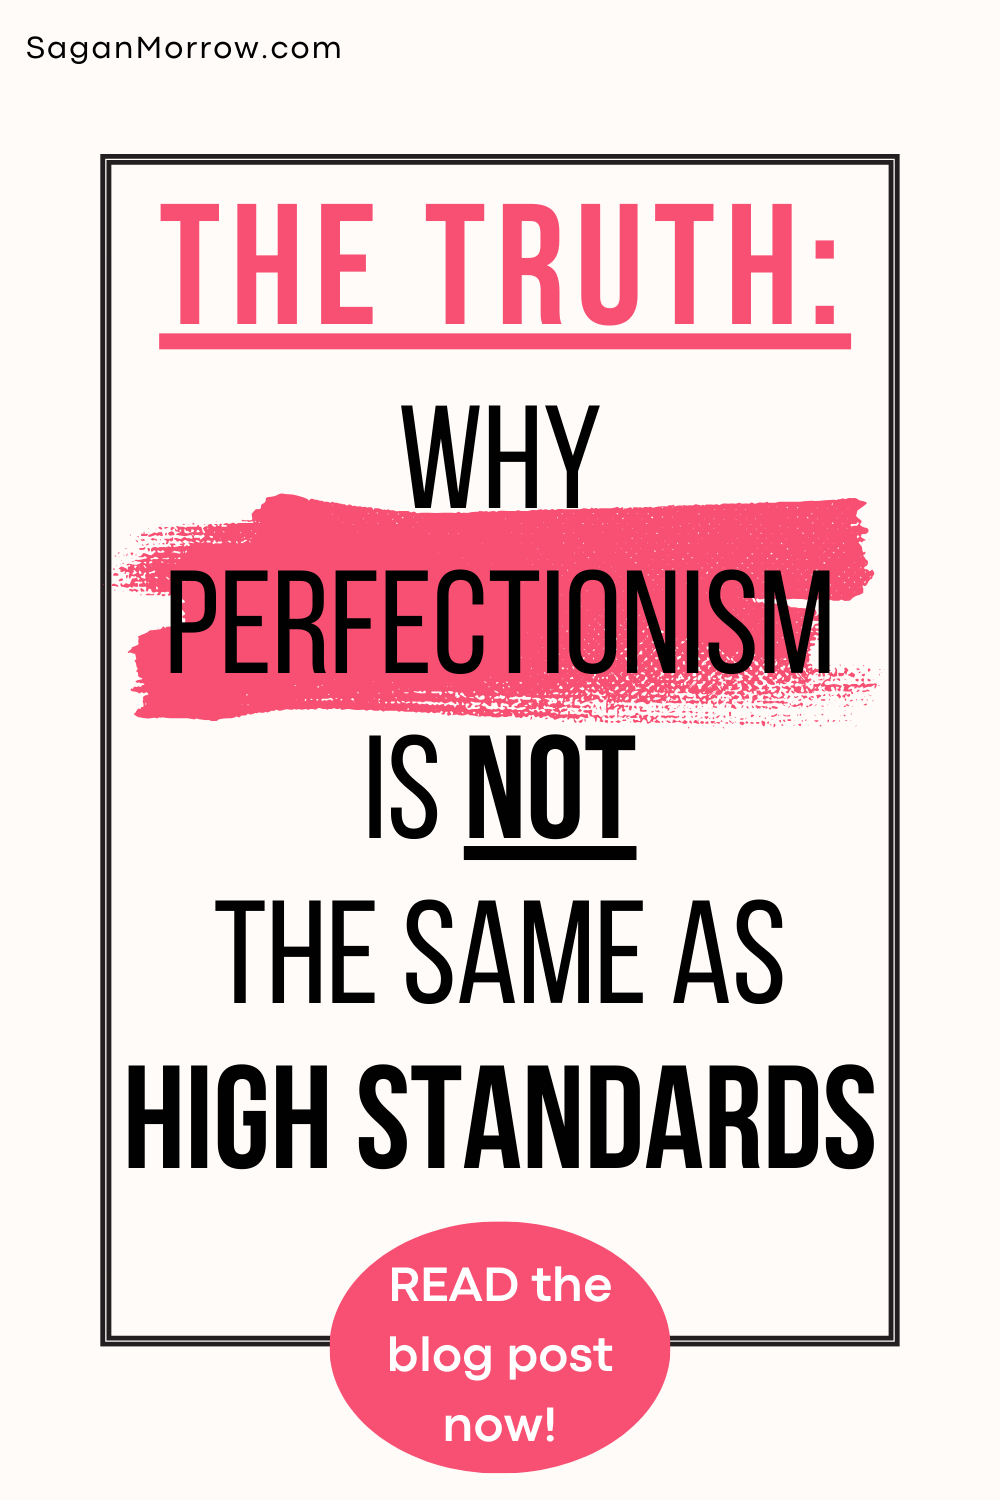 the truth about perfectionism - why perfectionism is not the same as high standards